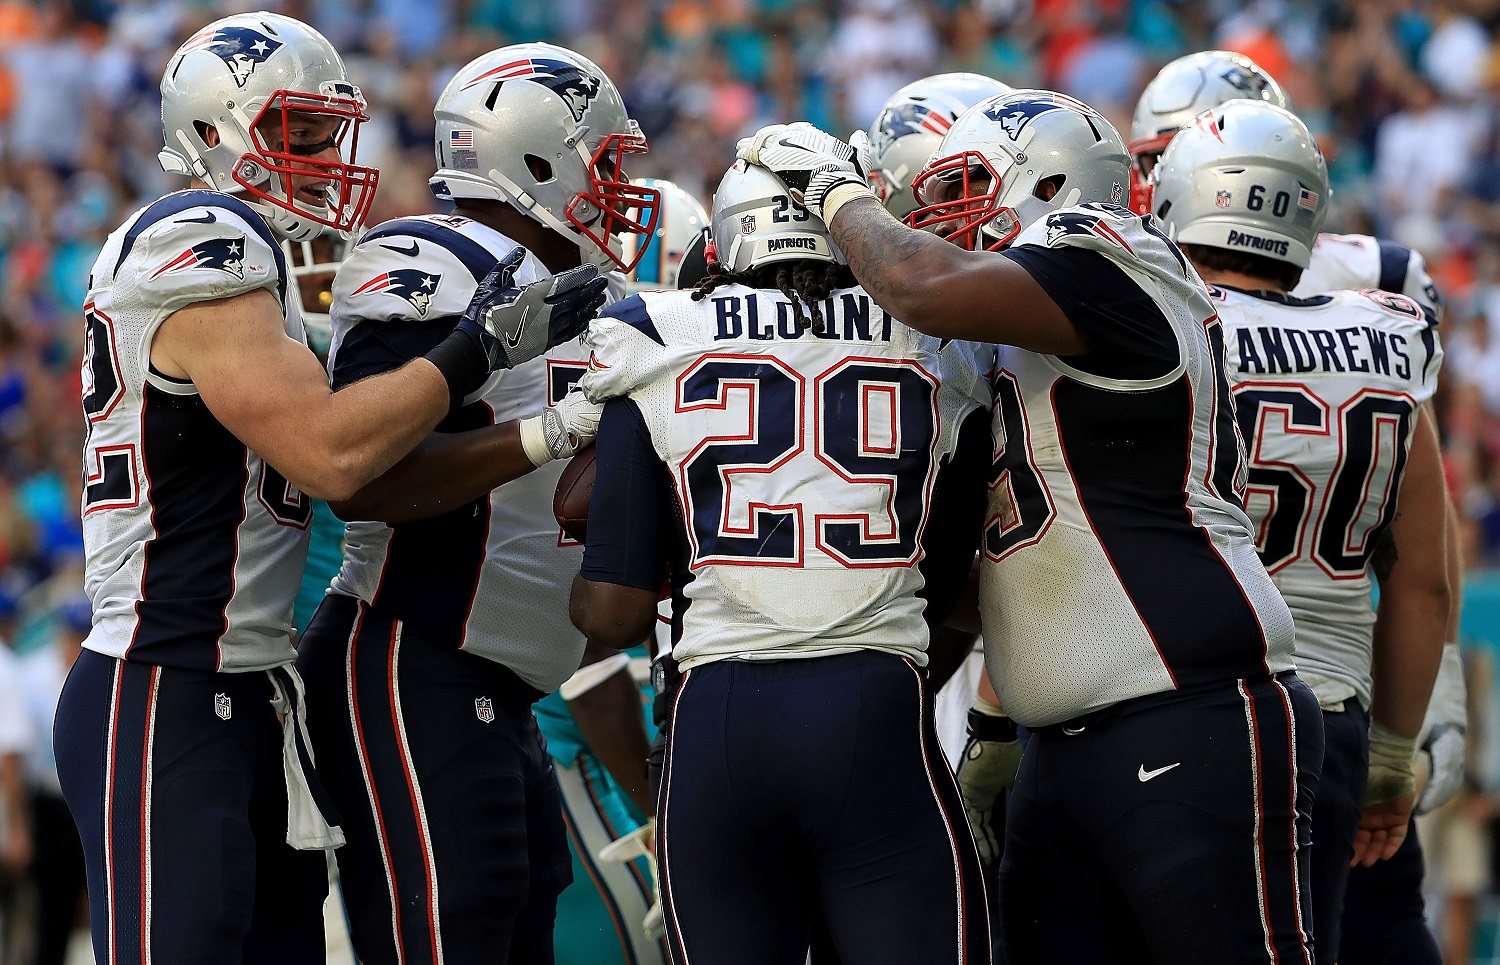 MIAMI GARDENS, FL - JANUARY 01:  LeGarrette Blount #29 of the New England Patriots celebrates a touchdown during a game against the Miami Dolphins at Hard Rock Stadium on January 1, 2017 in Miami Gardens, Florida.  (Photo by Mike Ehrmann/Getty Images)